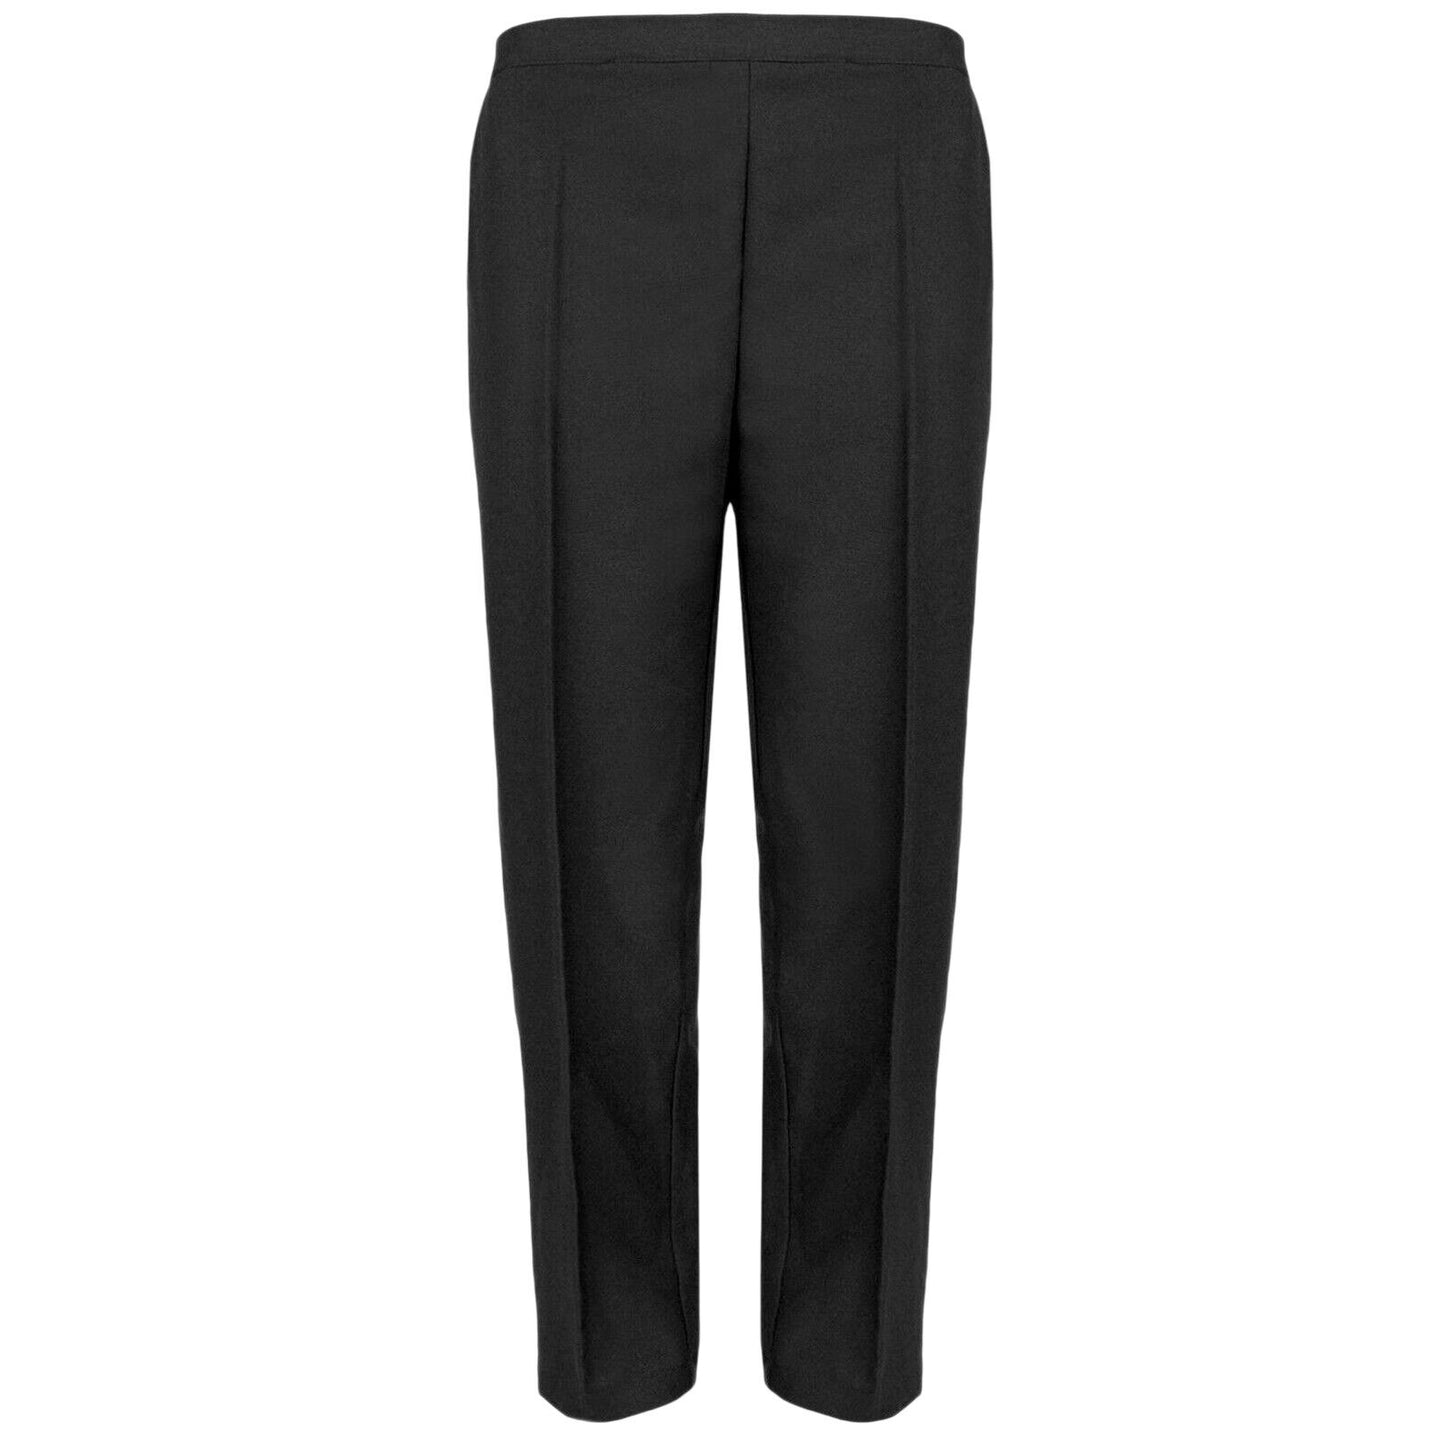 PACK OF 2 LADIES WOMENS HALF ELASTICATED WAIST TROUSERS WITH POCKETS PLUS SIZE 22 to 24